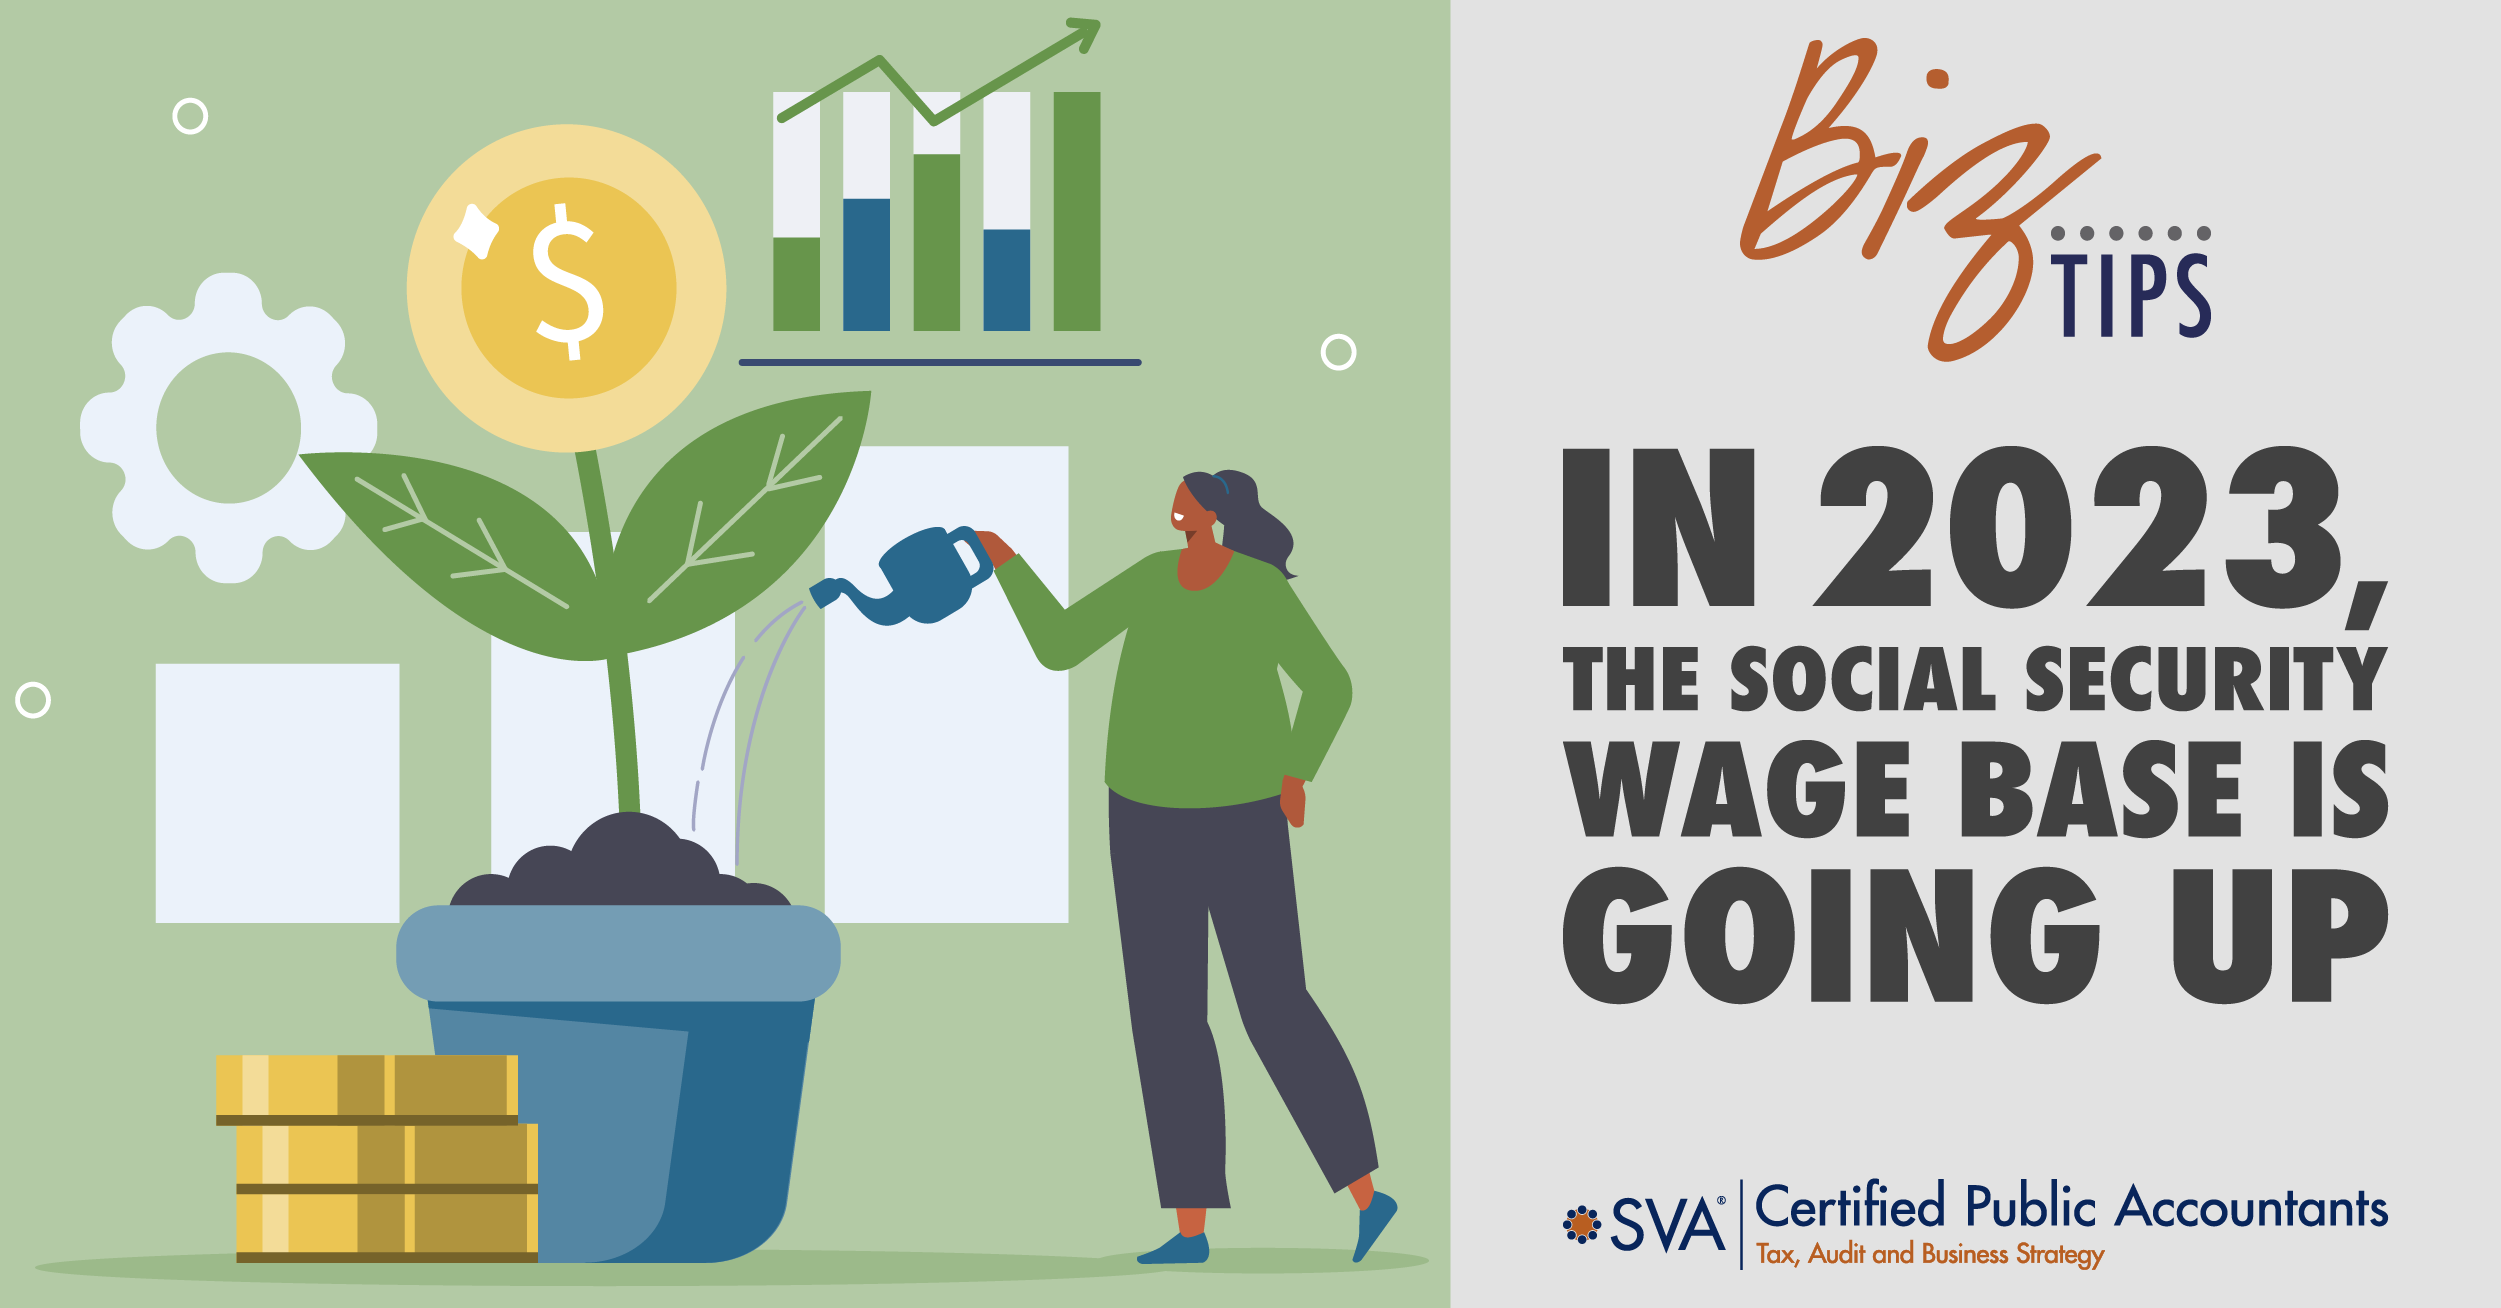 Employers: In 2023, the Social Security Wage Base is Going Up